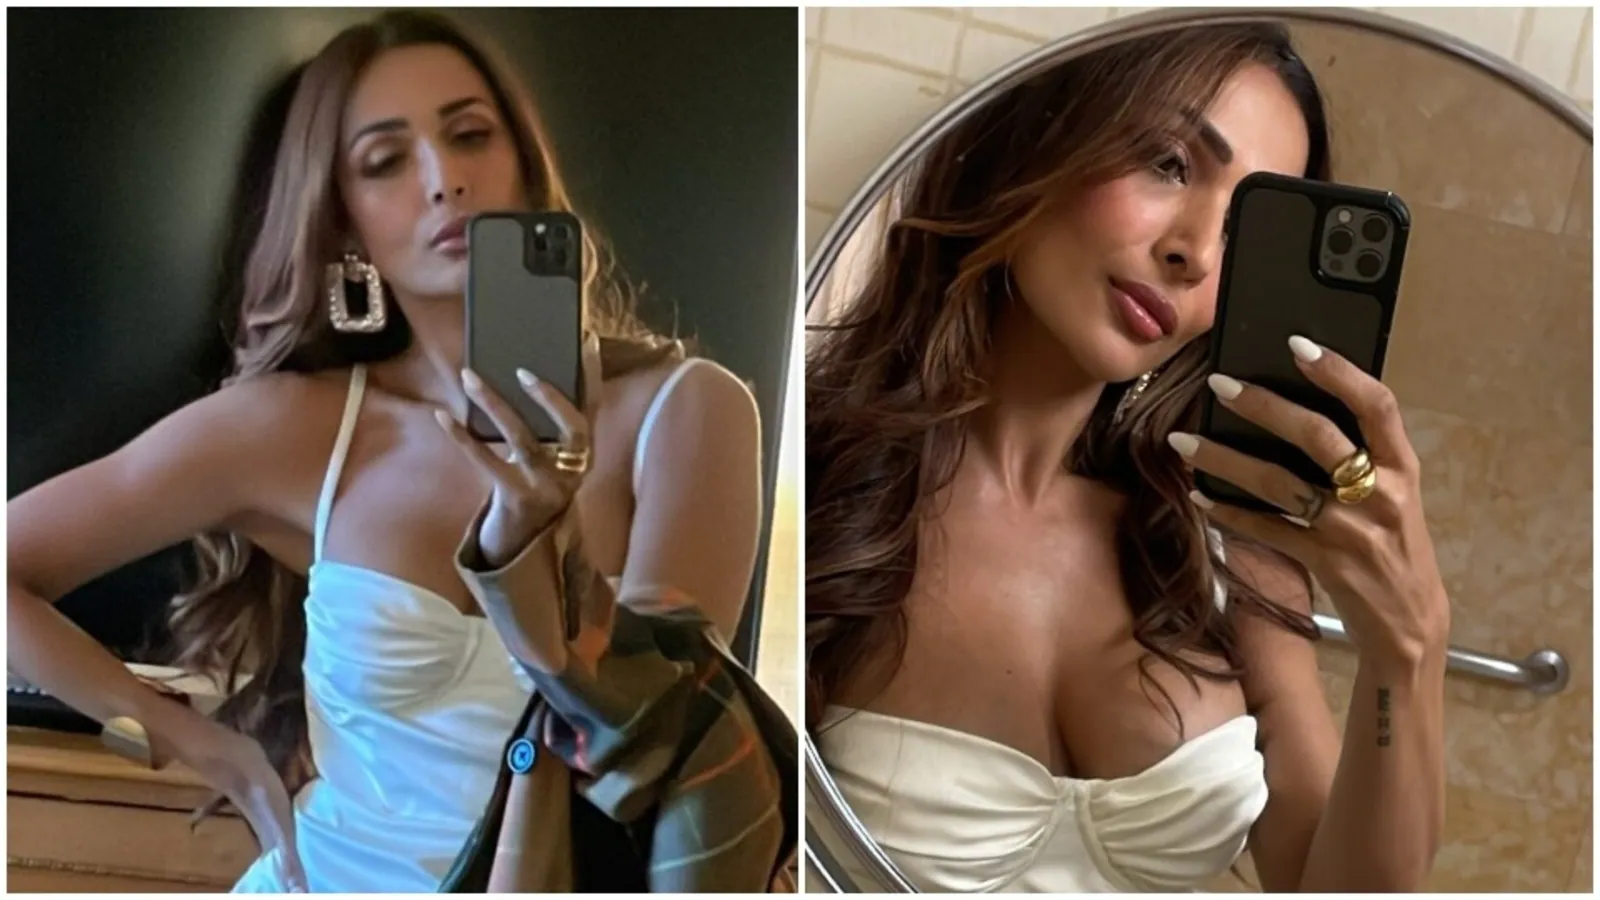 Malaika Arora takes over San Francisco in strappy white dress with thigh-slit and trench coat: See pics